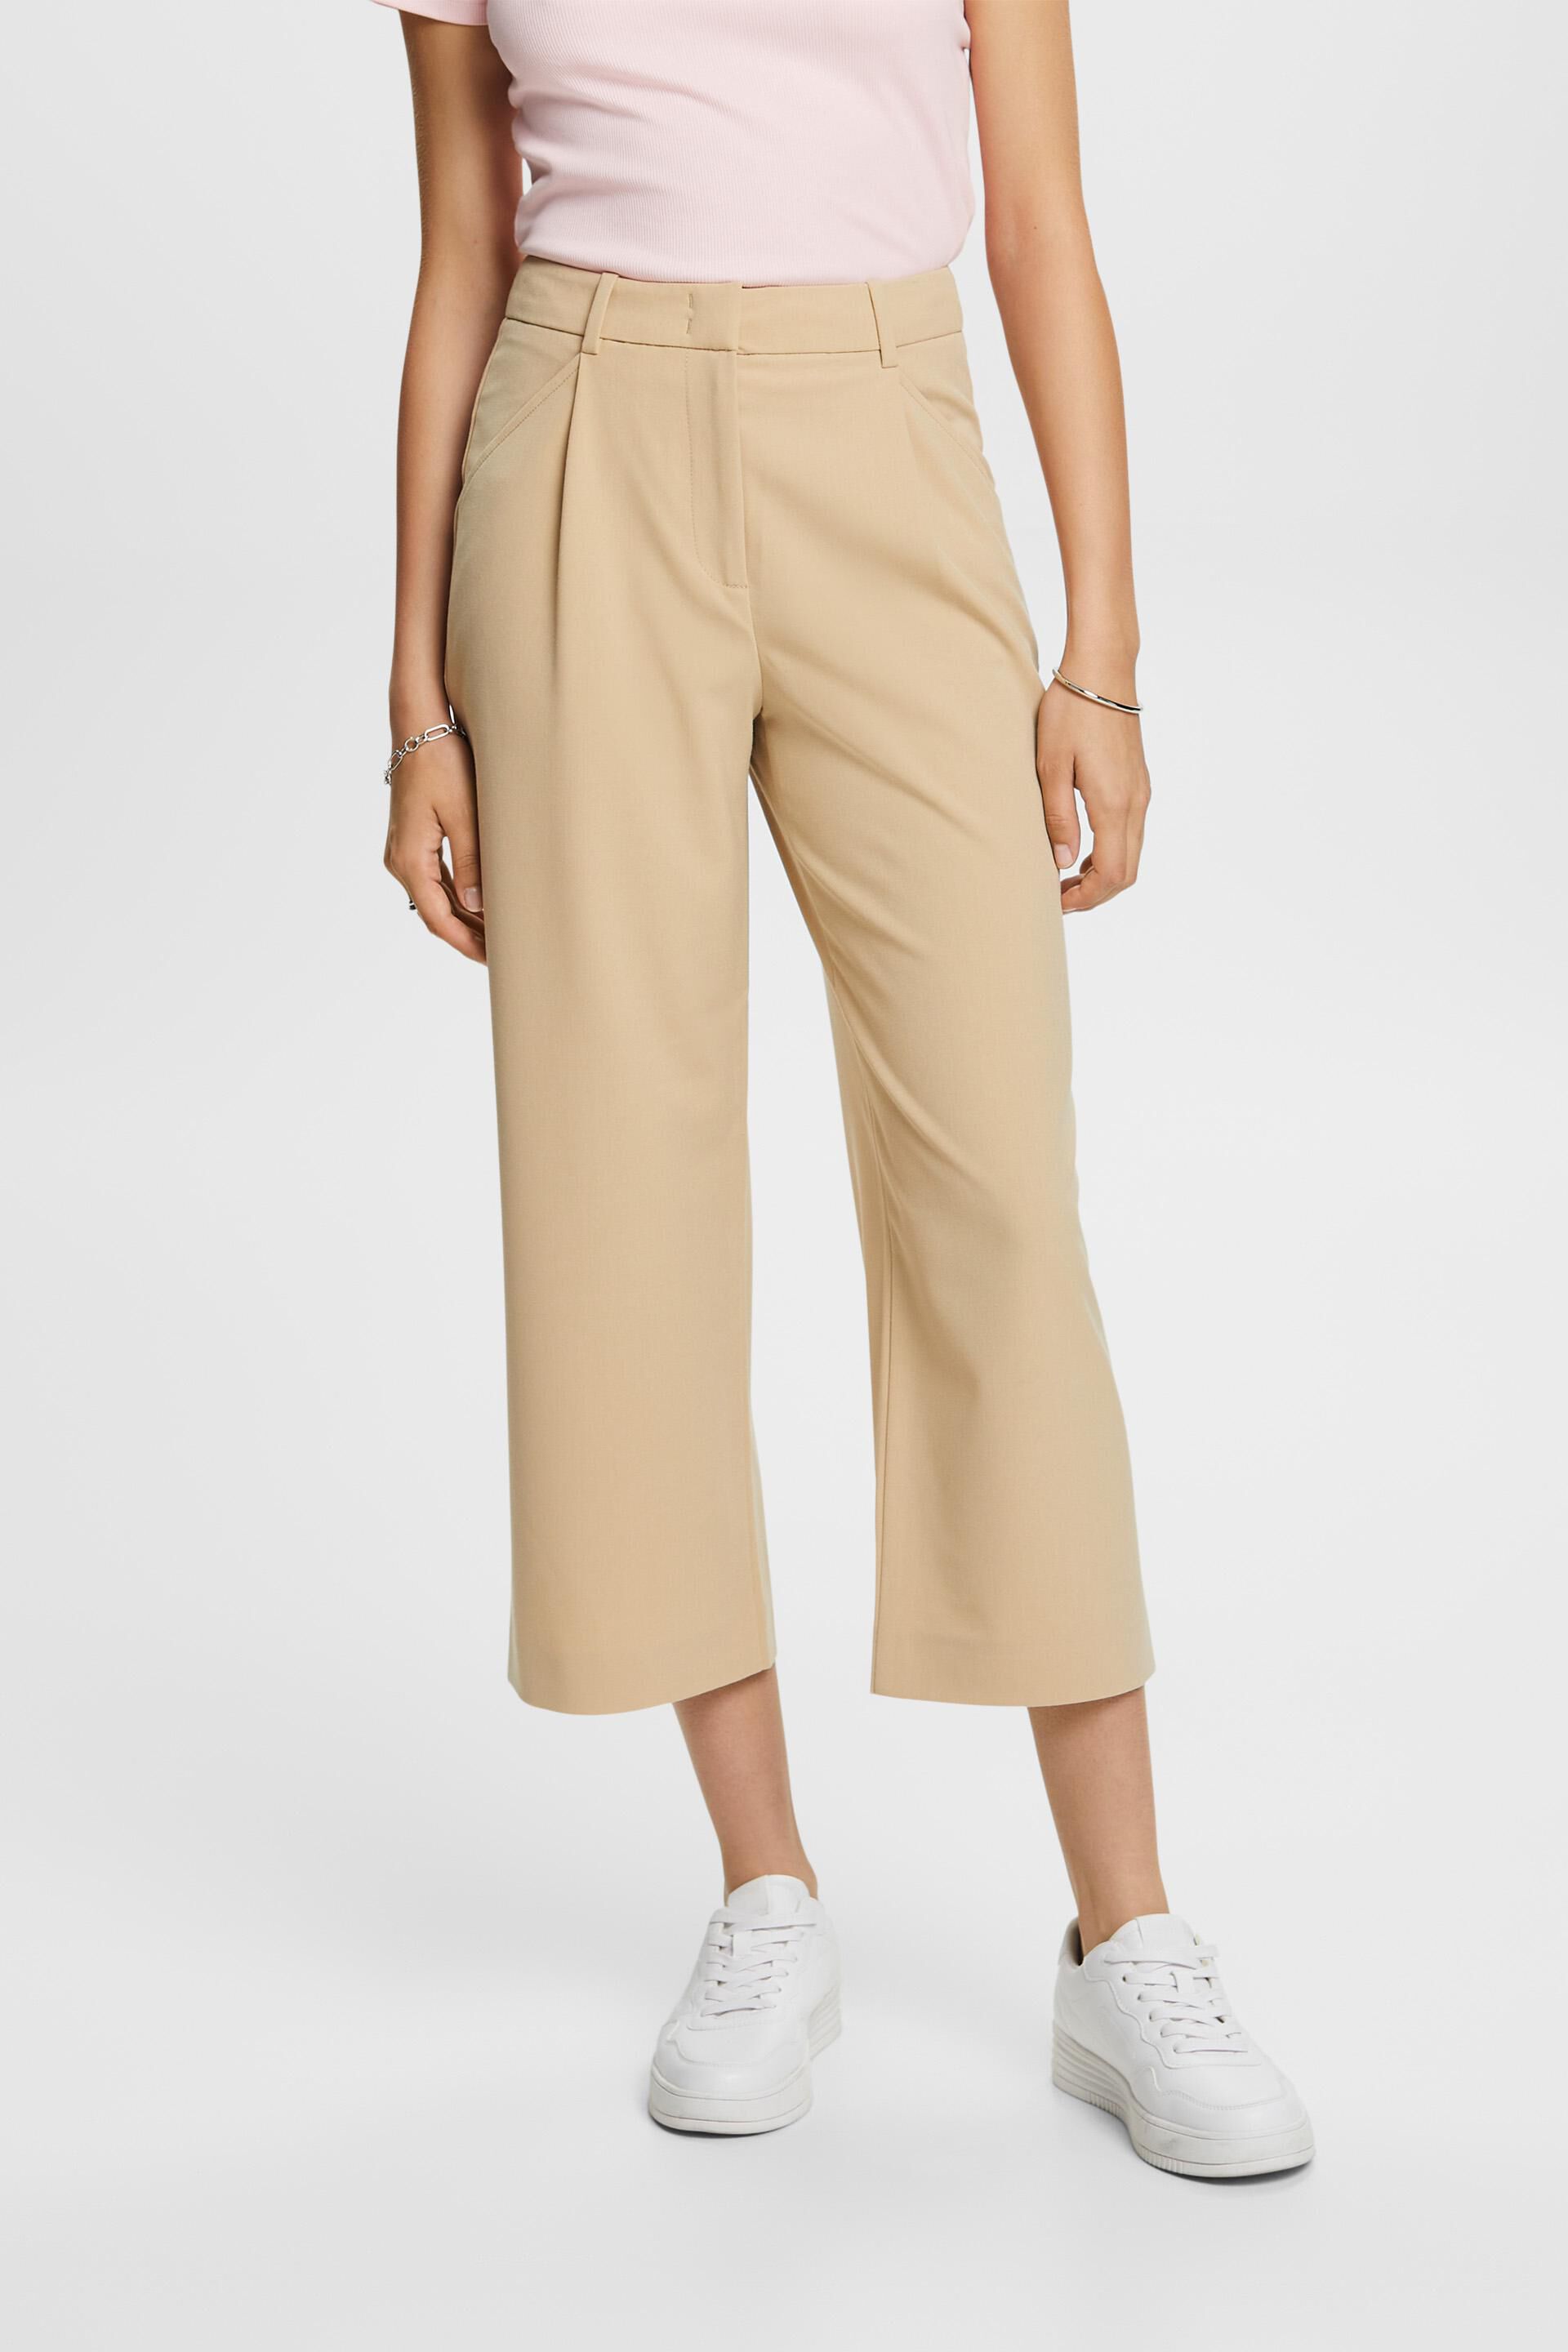 Esprit pleats High-rise waist culottes with